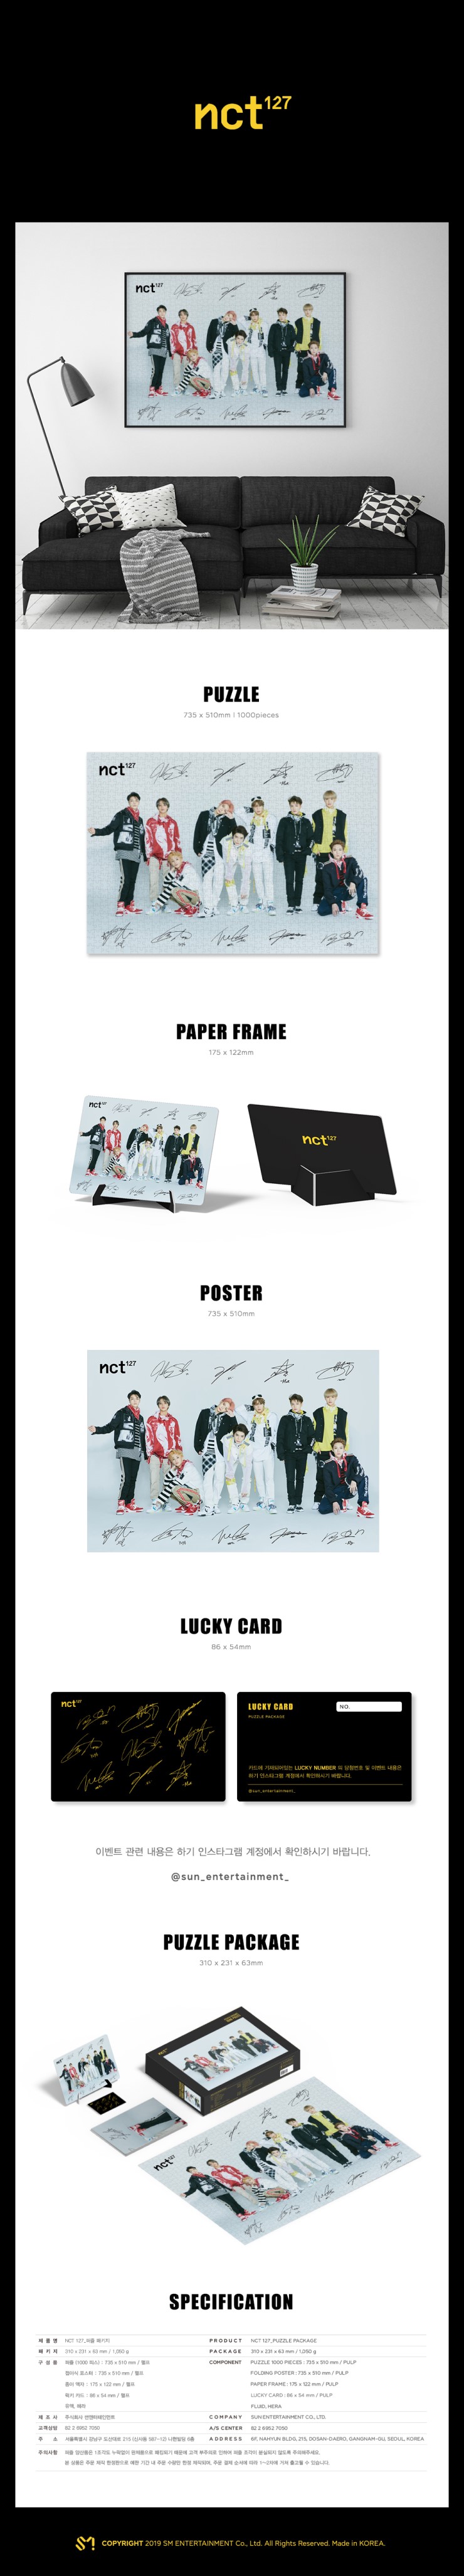 NCT 127(엔시티 127) - PUZZLE PACKAGE [단체]